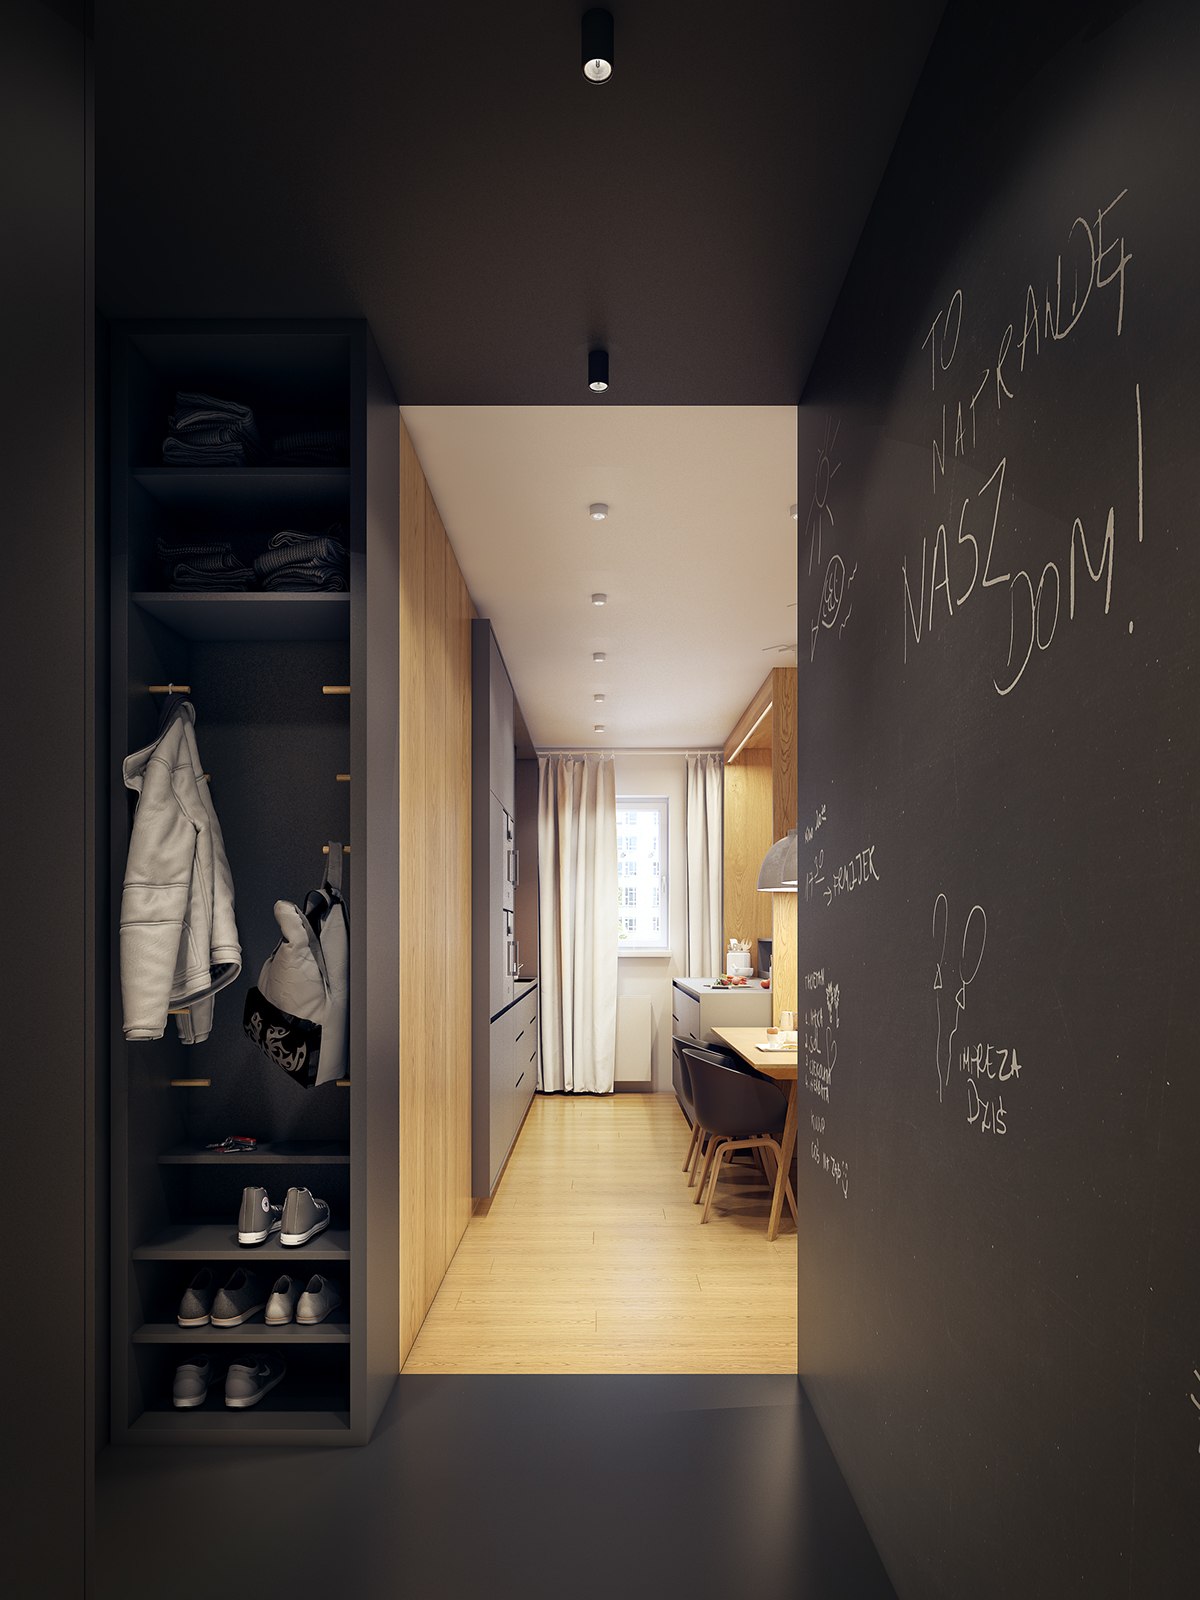 Entrance area ideas "width =" 1200 "height =" 1600 "srcset =" https://mileray.com/wp-content/uploads/2020/05/1588511596_217_Minimalist-And-Simple-Bedroom-Design-With-Gray-Shades.jpg 1200w, https: // myfashionos .com / wp-content / uploads / 2016/03 / All-Black-Apartment-Eingang-225x300.jpg 225w, https://mileray.com/wp-content/uploads/2016/03/all-black-apartment- entryway-768x1024.jpg 768w, https://mileray.com/wp-content/uploads/2016/03/all-black-apartment-entryway-696x928.jpg 696w, https://mileray.com/wp-content/ Uploads / 2016/03 / All-Black-Apartment-Entrance-1068x1424.jpg 1068w, https://mileray.com/wp-content/uploads/2016/03/all-black-apartment-entryway-315x420.jpg 315w " Sizes = "(maximum width: 1200px) 100vw, 1200px